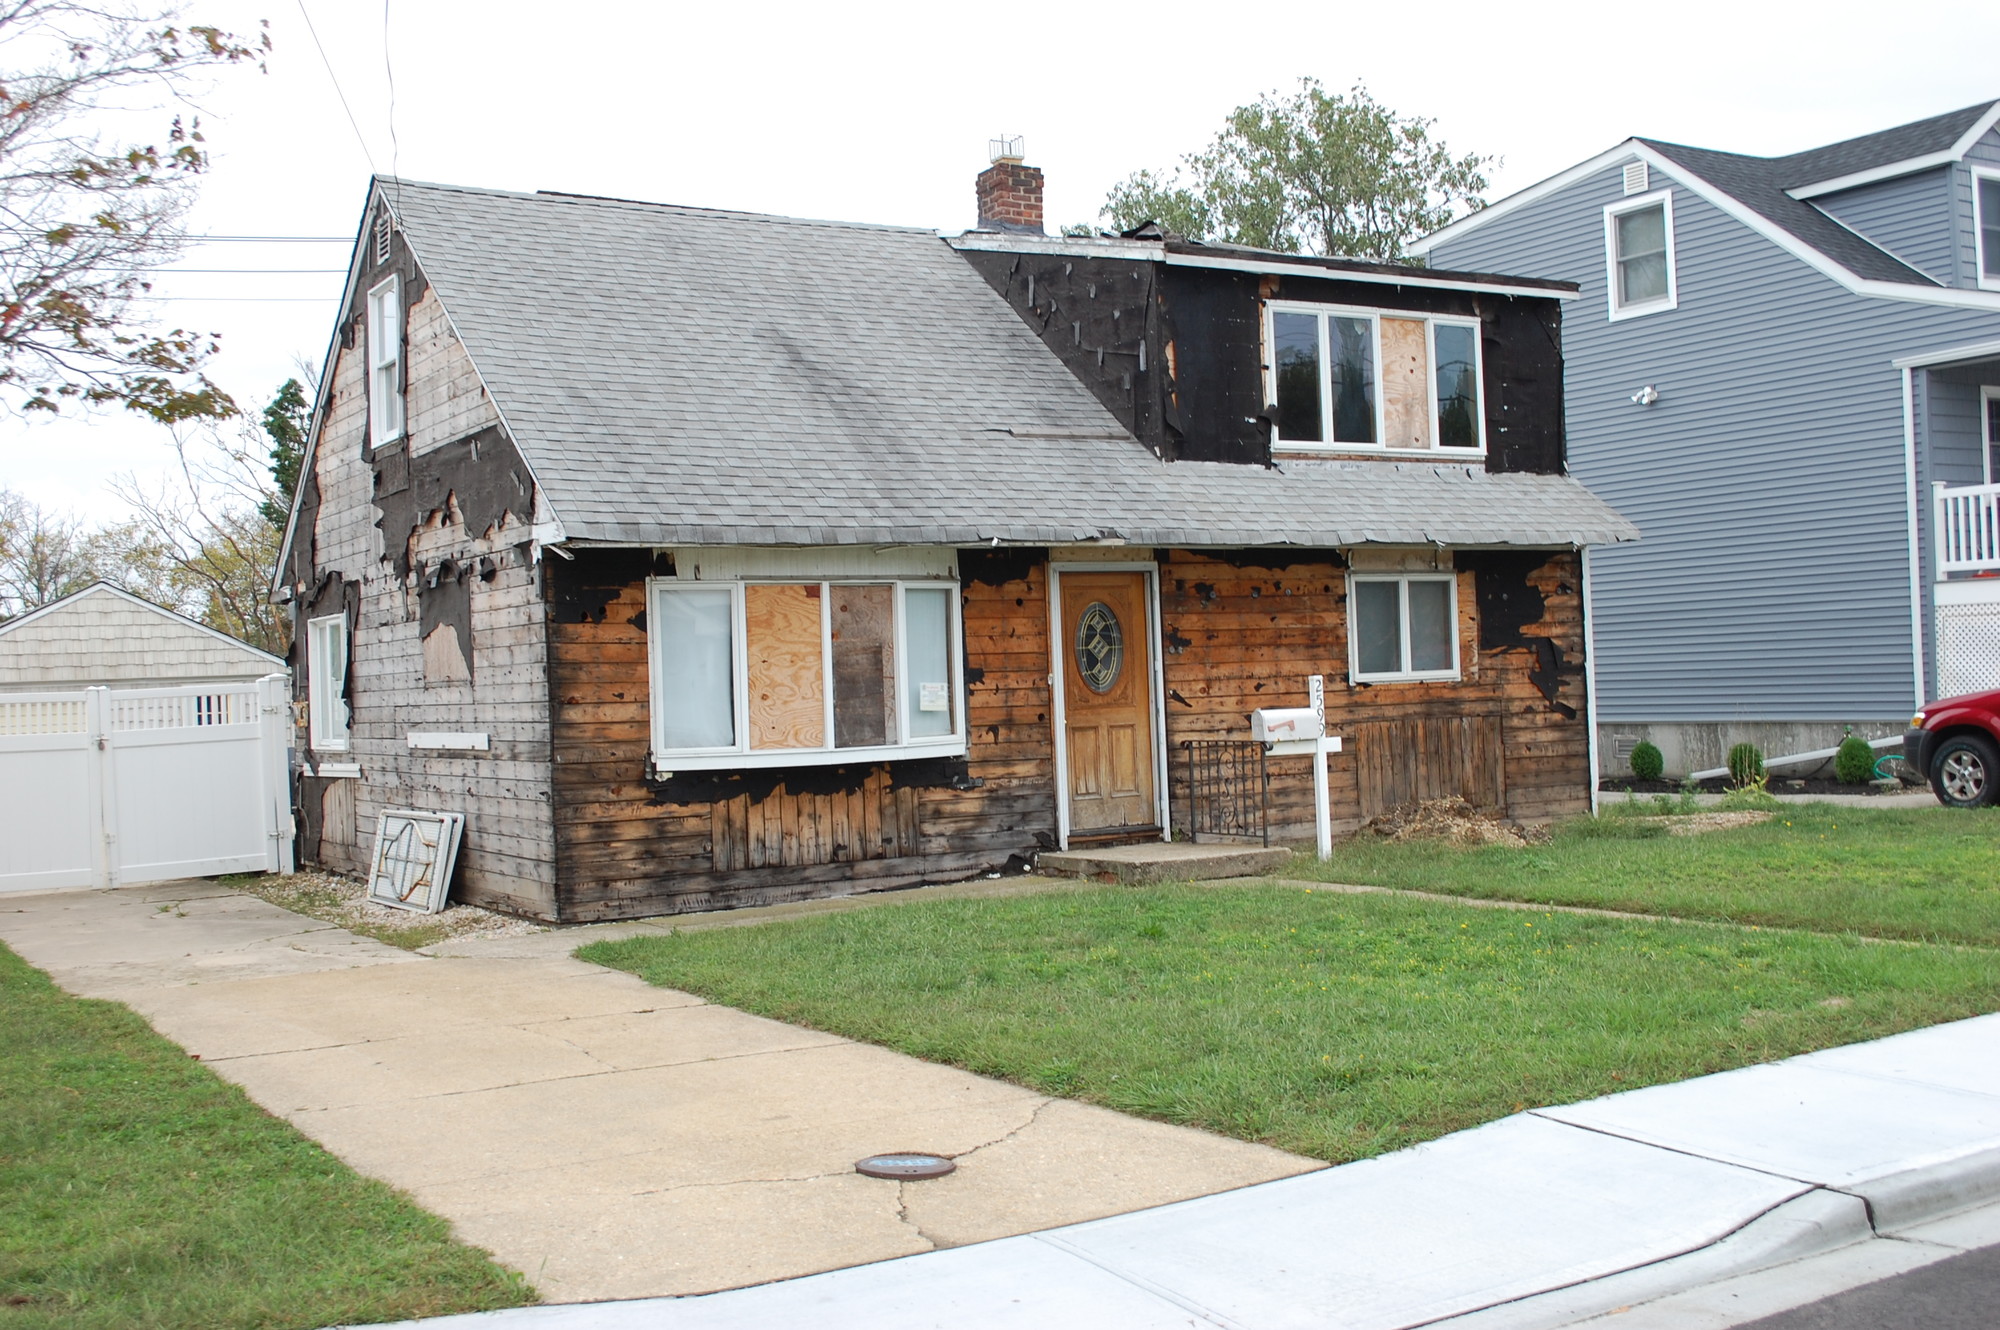 A home on Wantagh Avenue that is still awaiting repairs after Hurricane Sandy sits between one up for auction and another that has been raised and renovated.